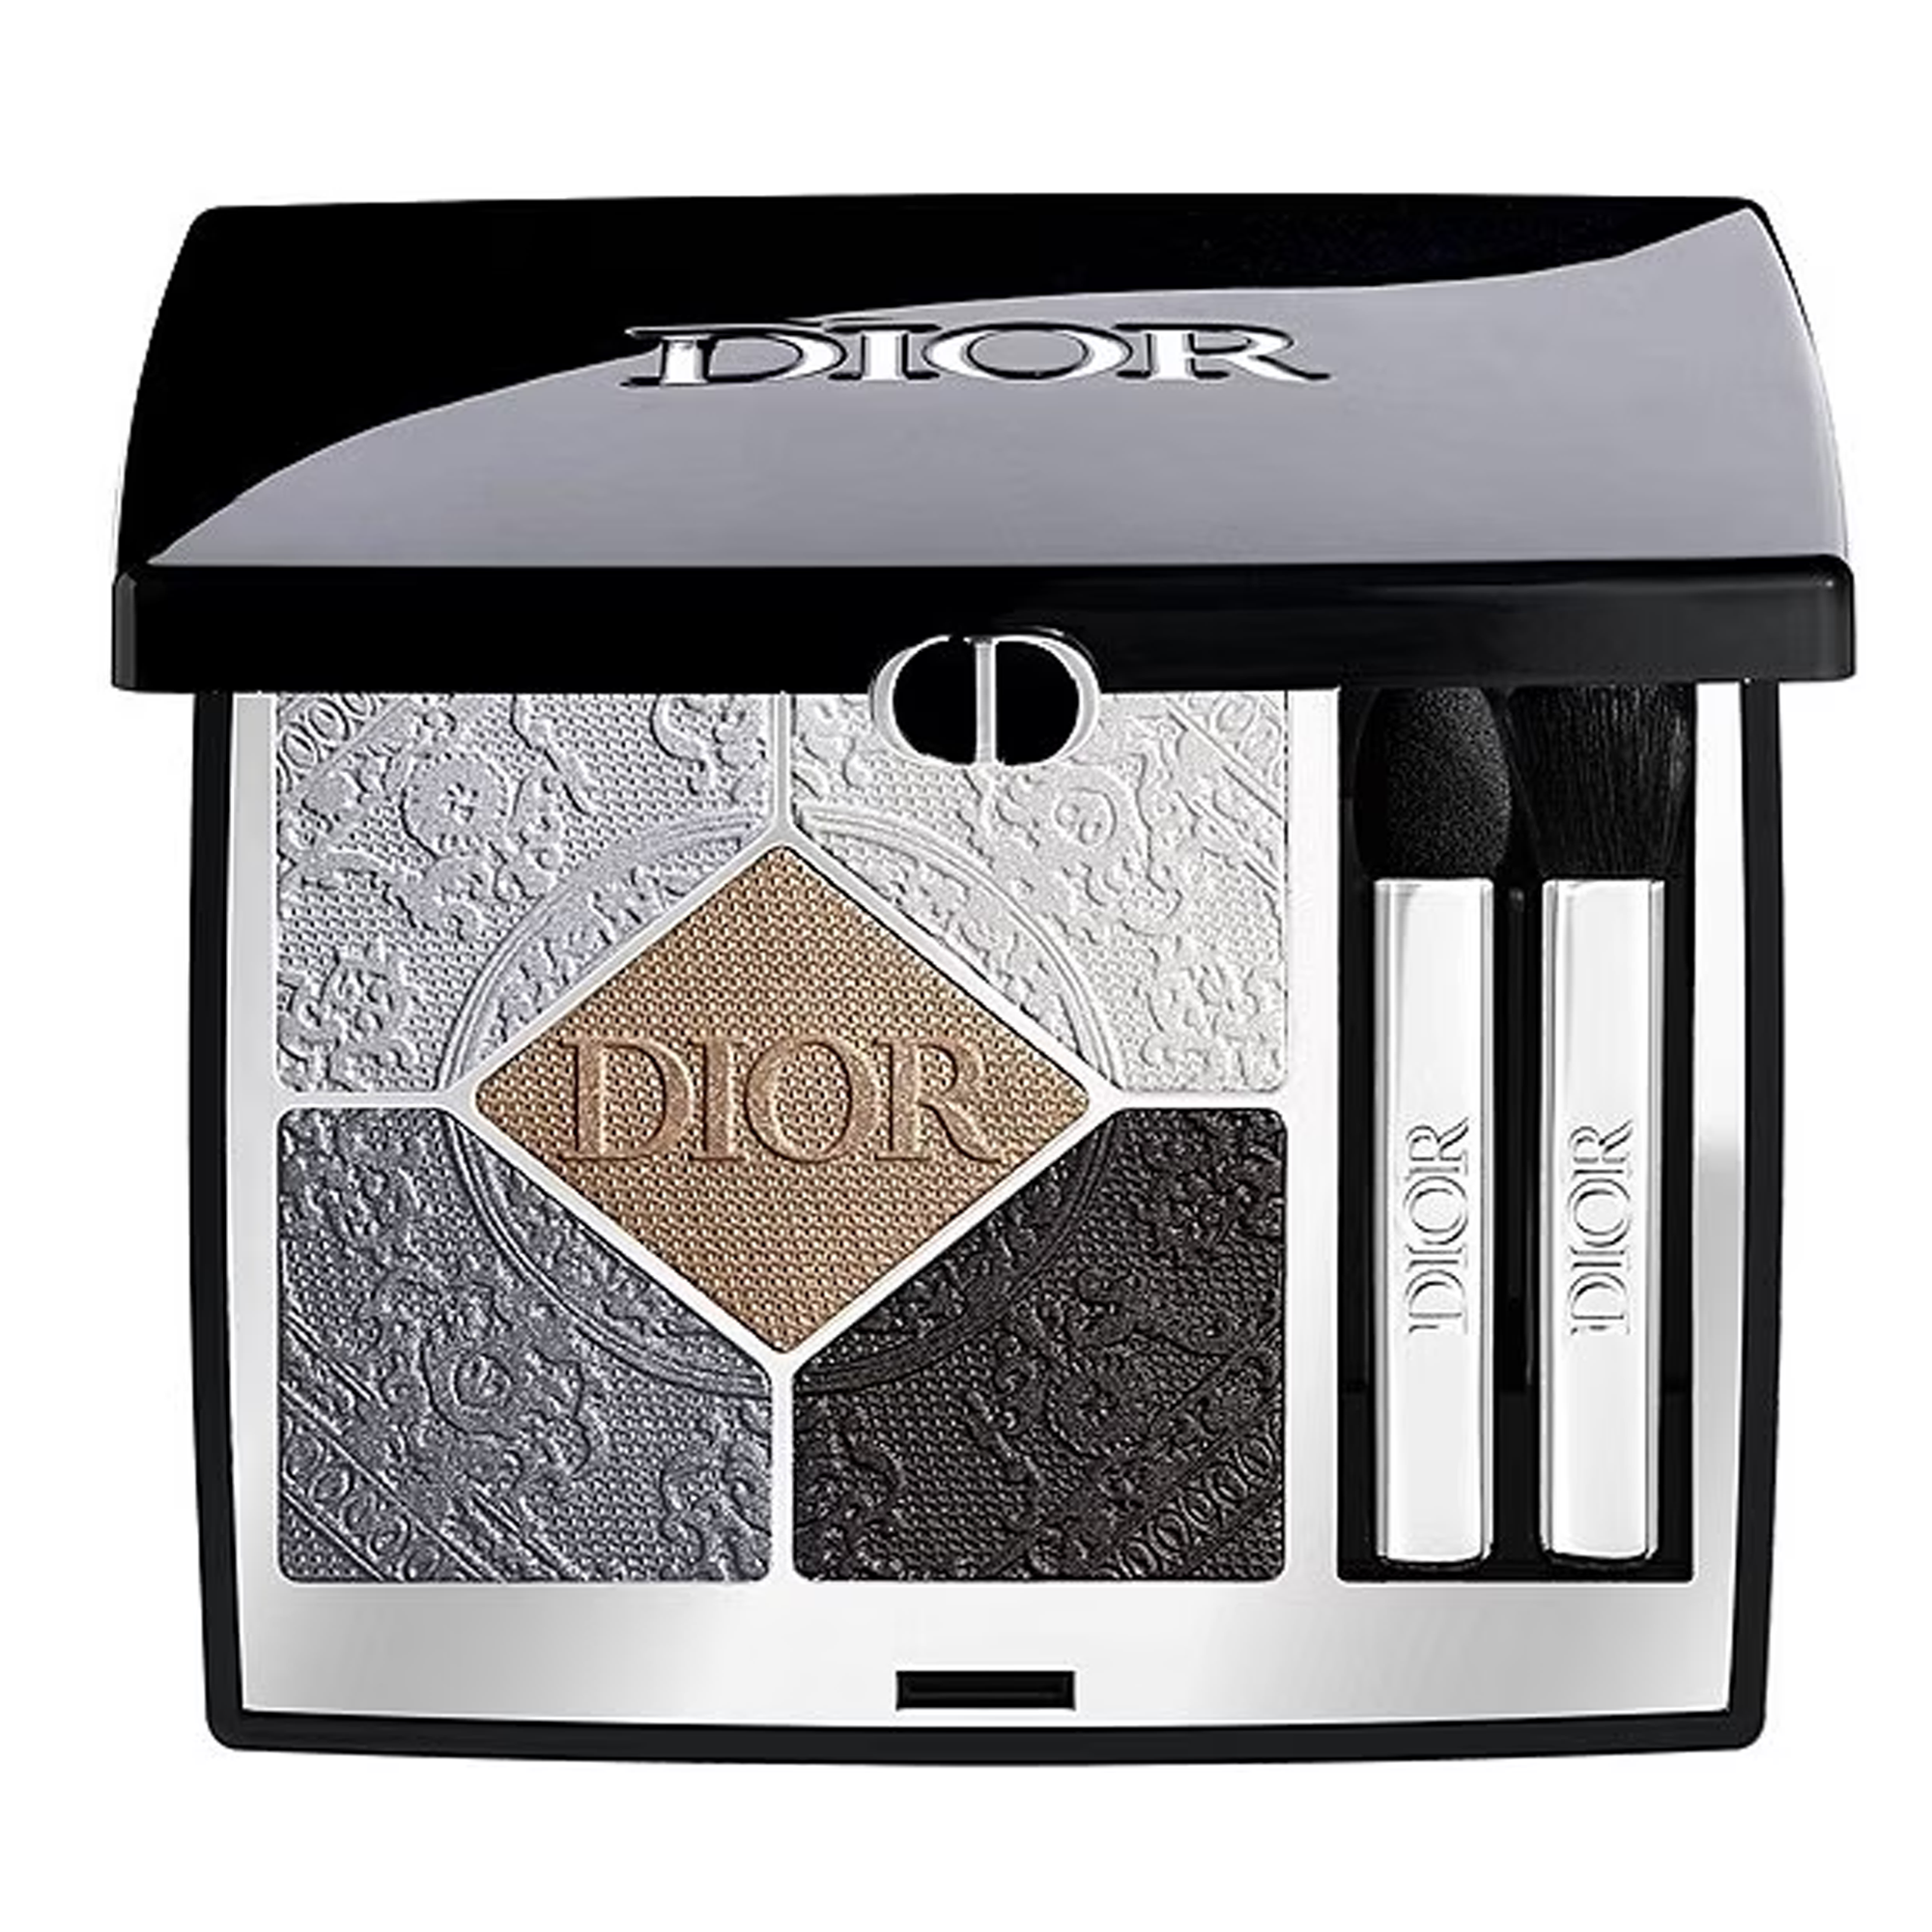 Diorshow Holiday 5-Color Eyeshadow Palette